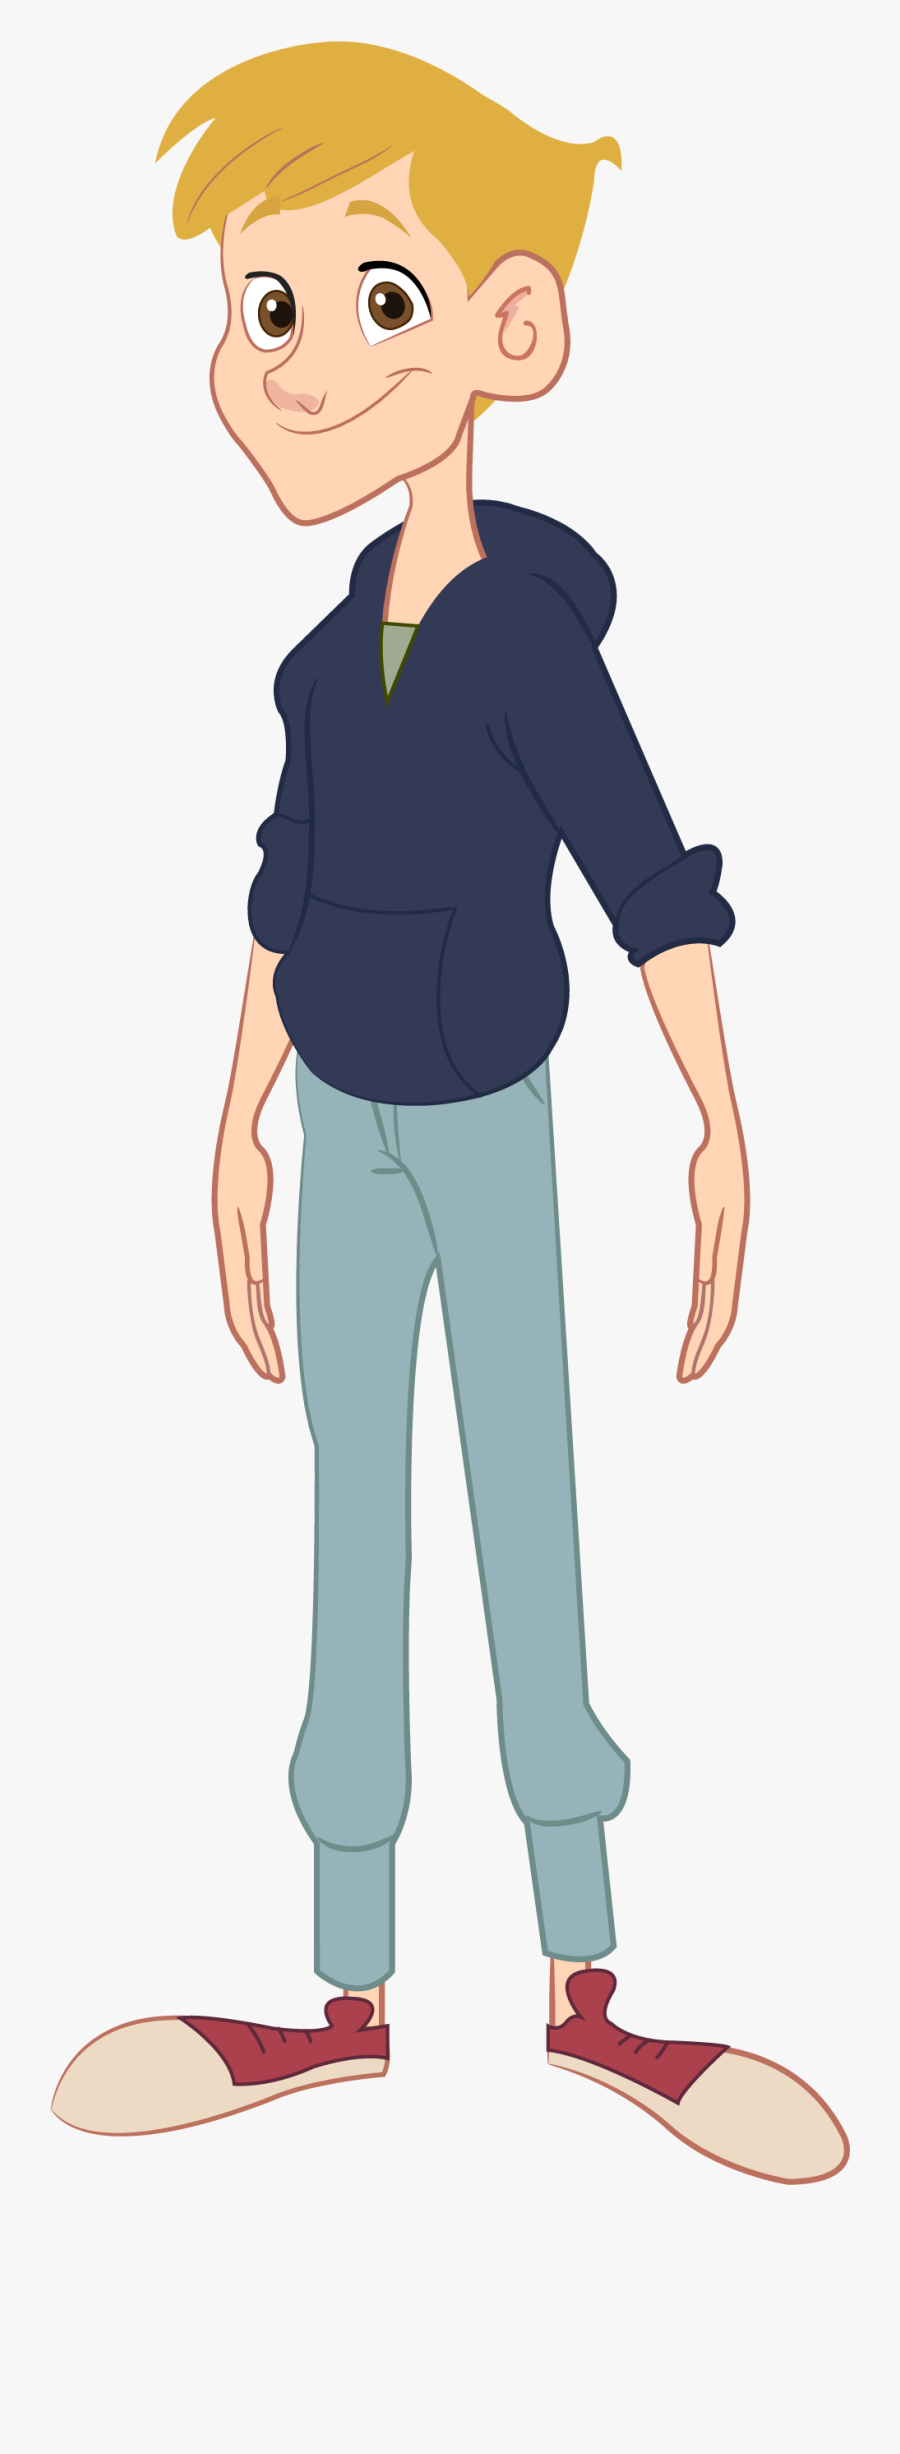 Boy Photo In Animation, Transparent Clipart